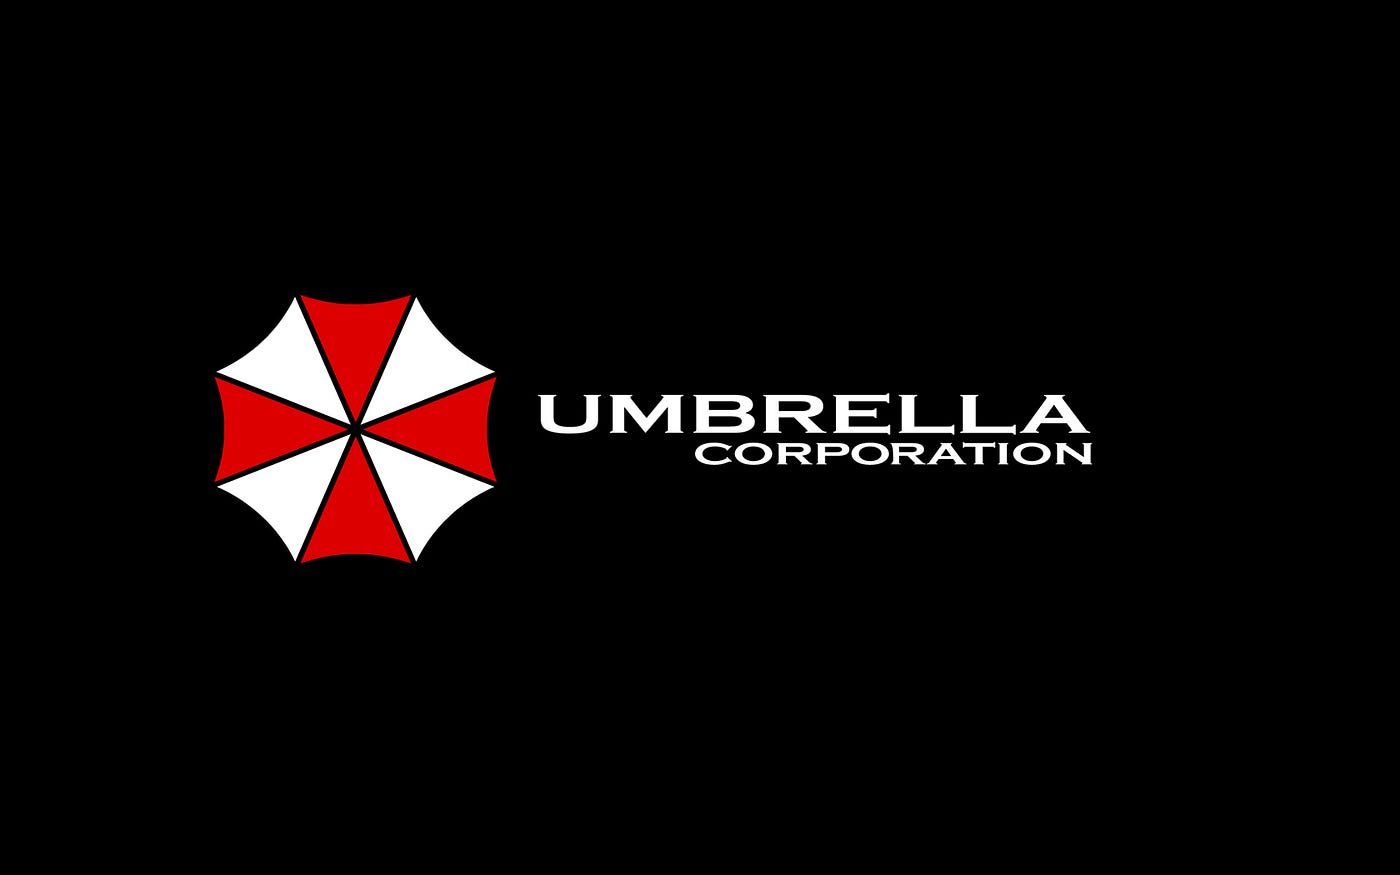 Umbrella Corporation to Reopen, Bring Jobs to the USA | by Colin Roy |  Silent Protagonist | Medium